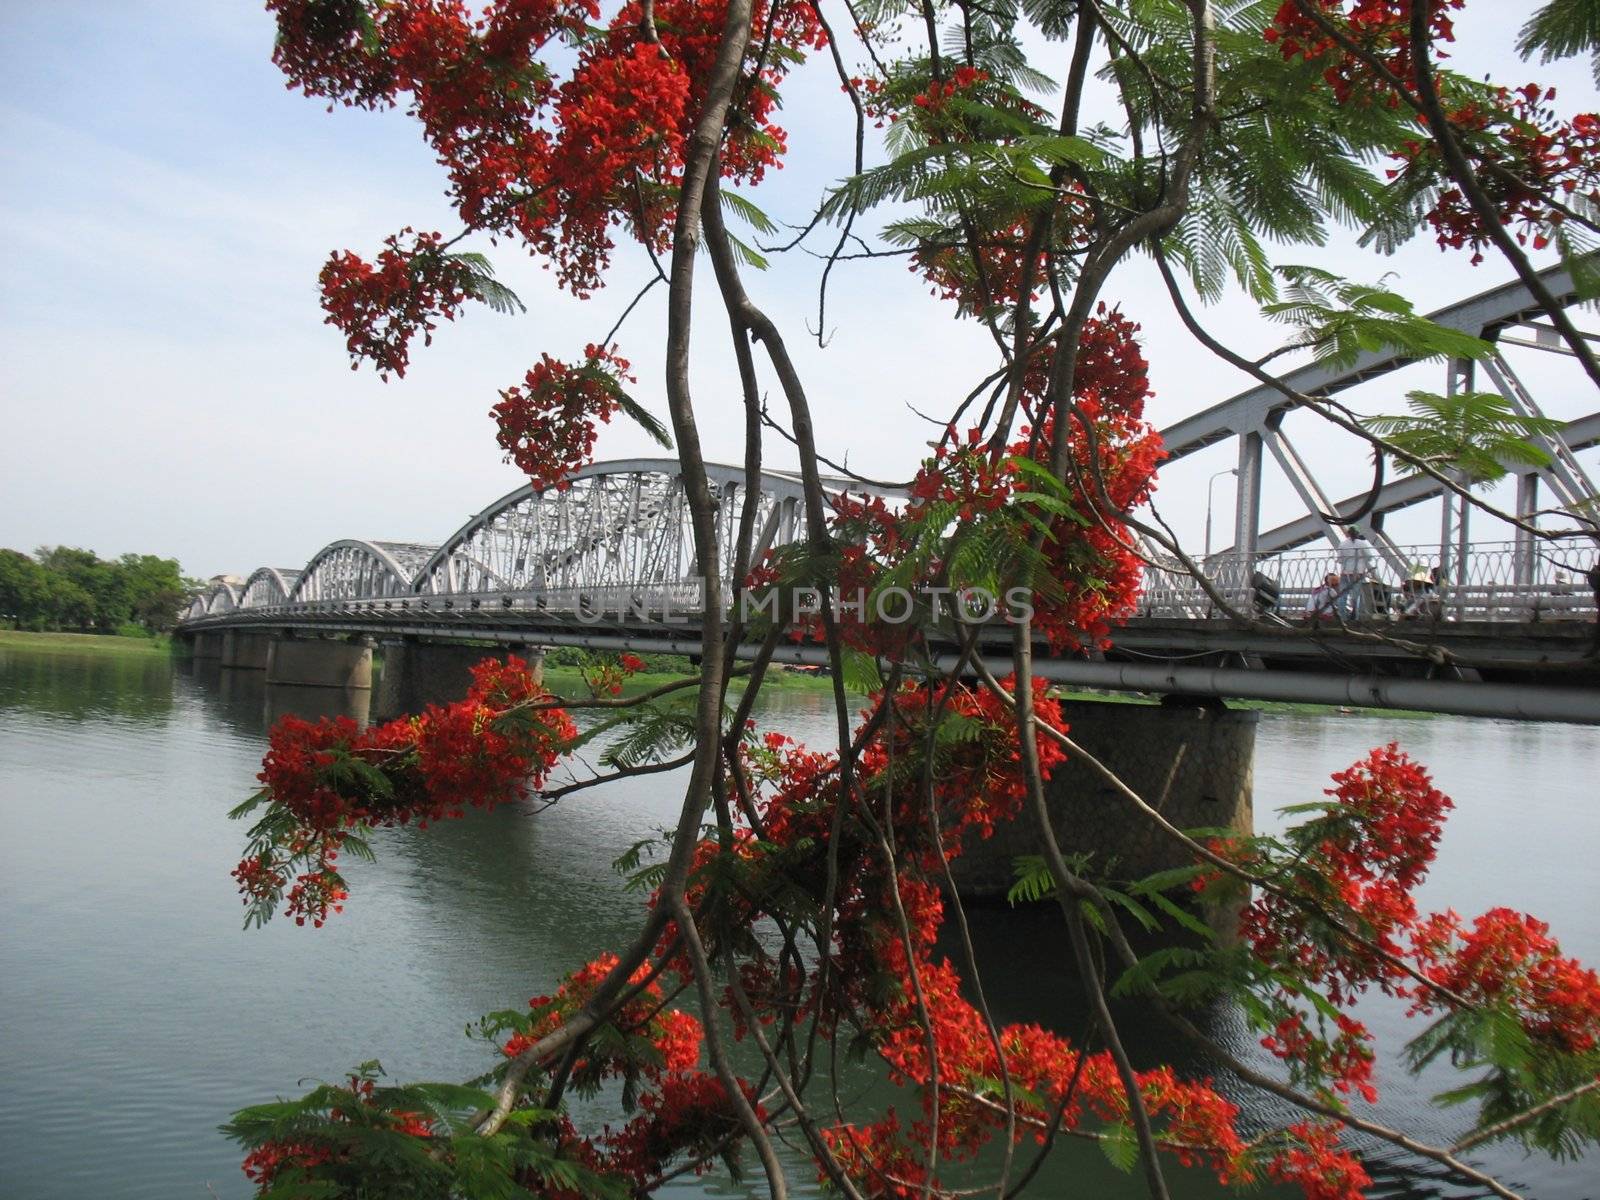 A bridge spanning the Hue Perfume River. In the foreground a Flamboyant flower.